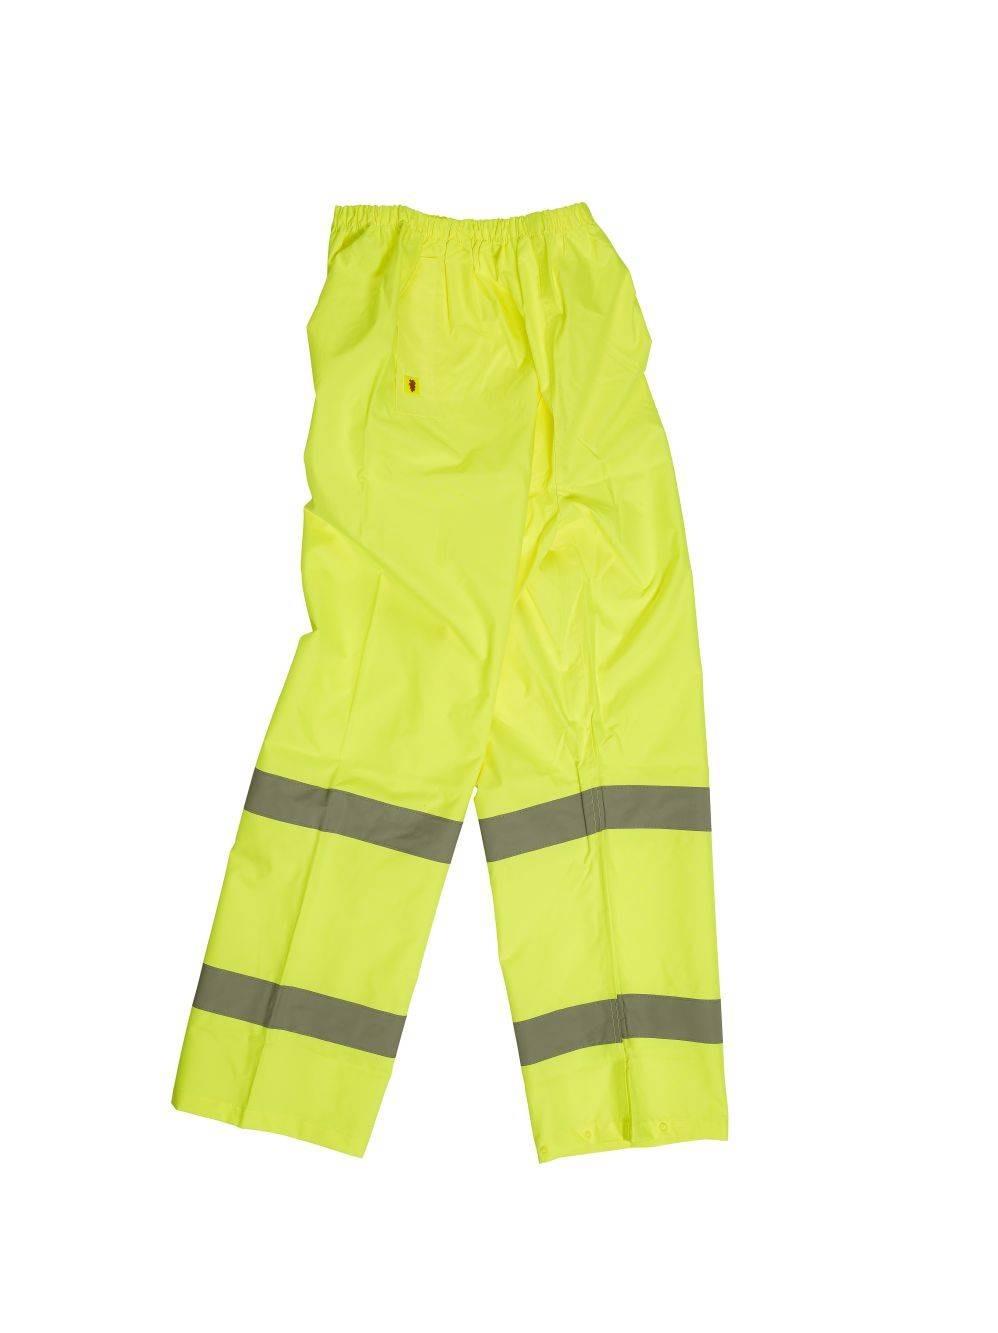 Warrior Hi-Vis yellow durable and water resistance work trousers #0118DWHV36SY